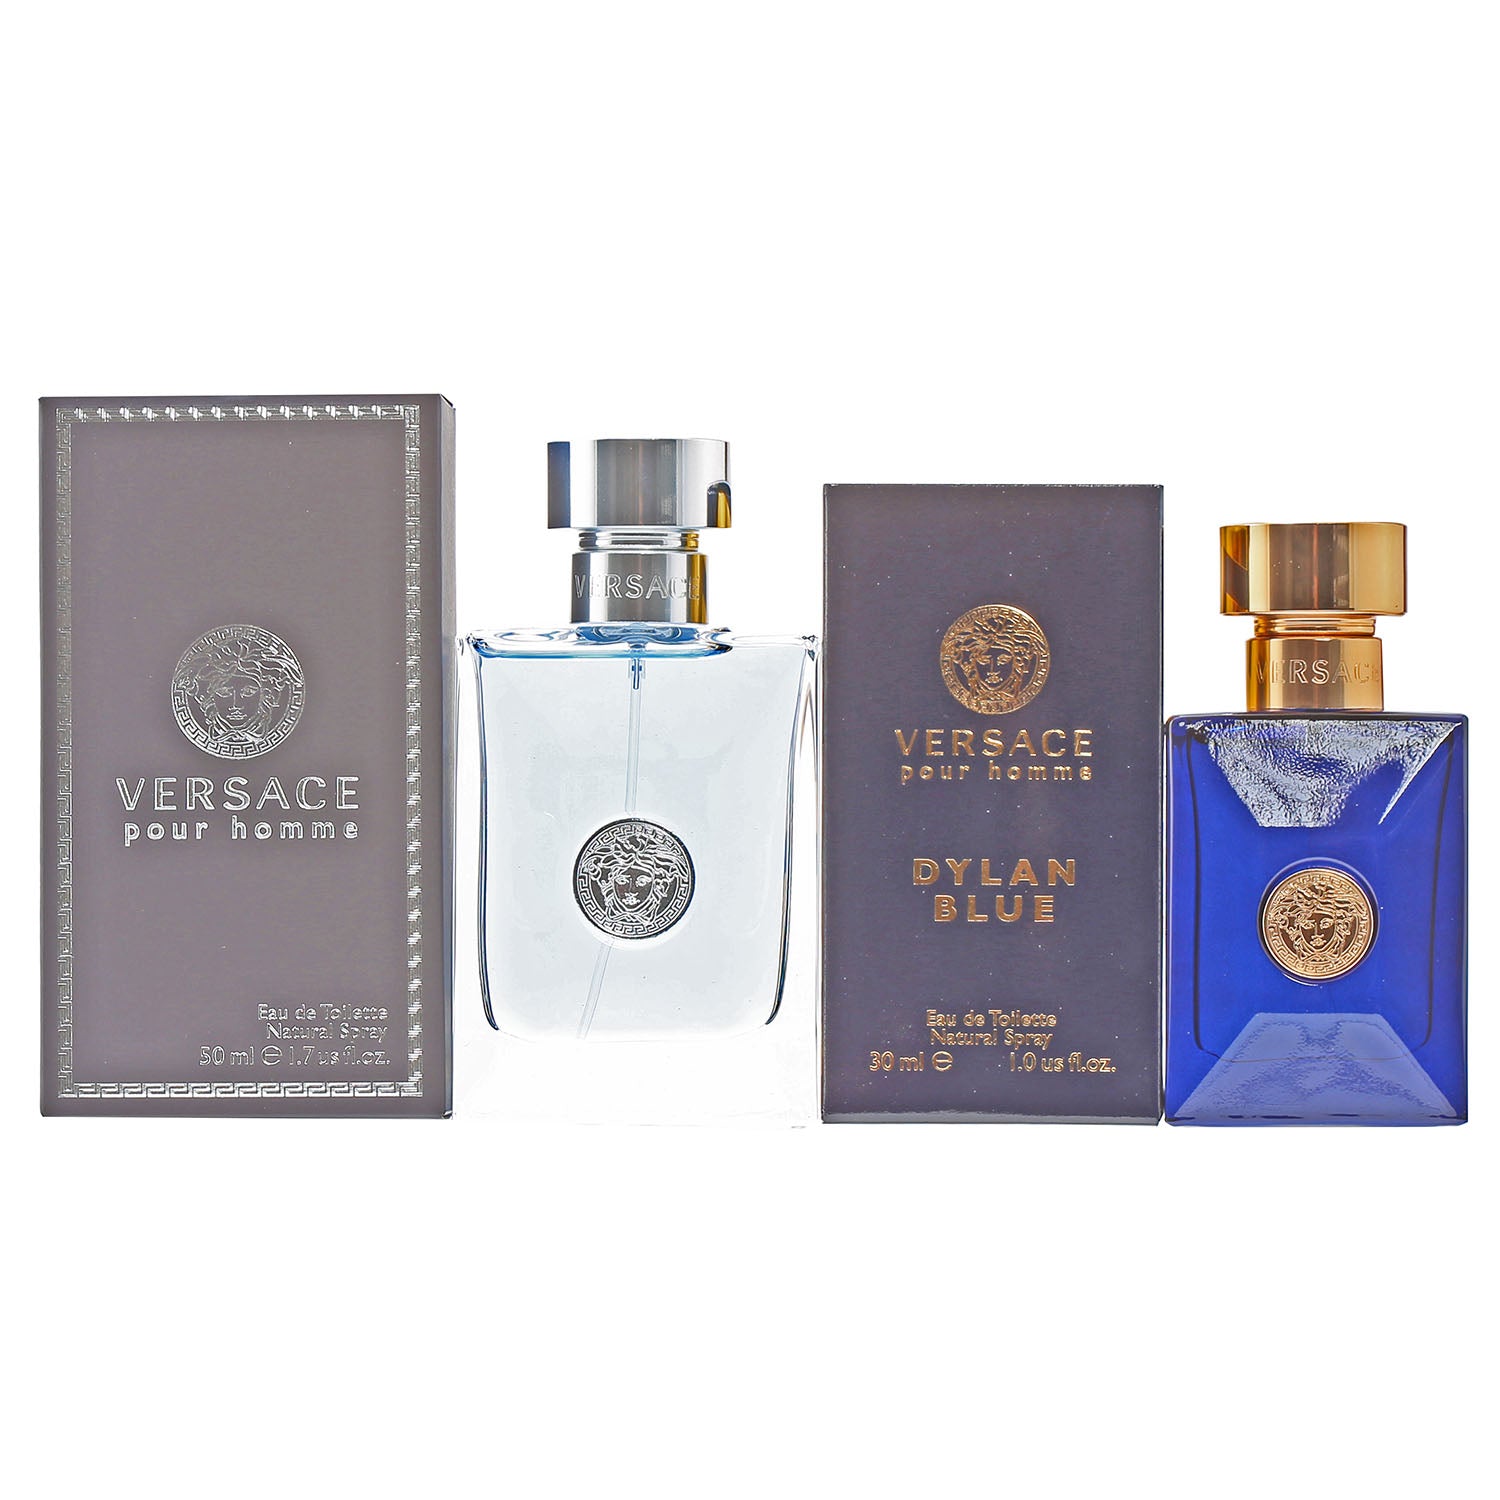 Versace 27060215 1.7 & 1 oz Duo Versace Pour Homme Dylan Blue Spray - Pack of 2